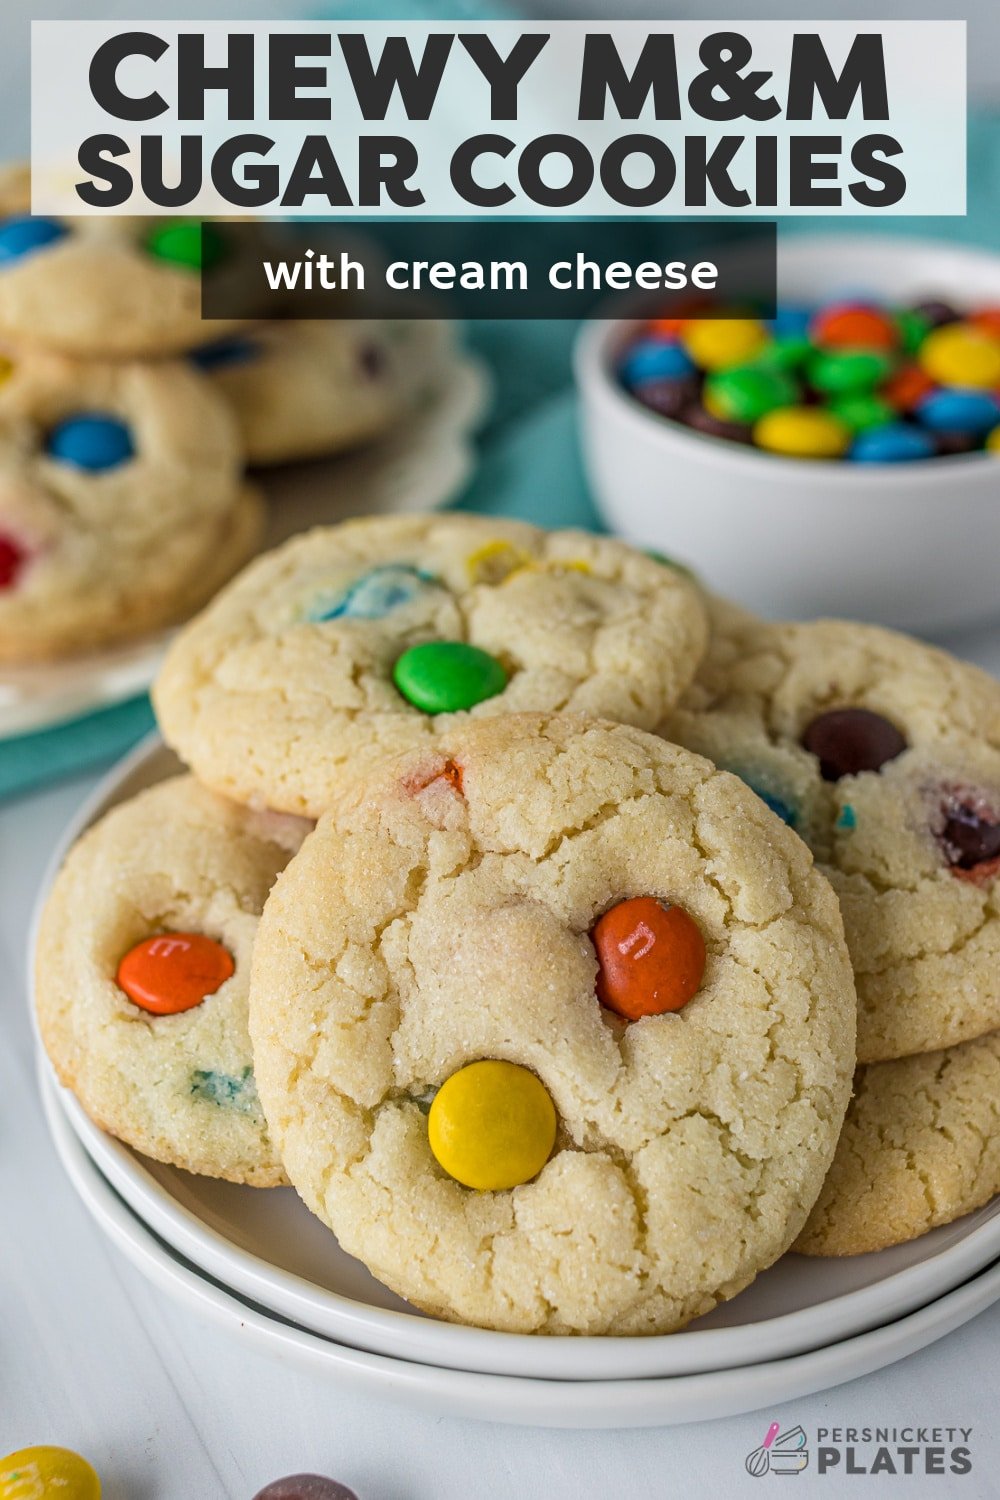 Chewy M&M Sugar Cookies - just like the Sugar Butter Cookies from the mall! Soft, chewy, and loaded with colorful M&Ms to suit any occasion. They're made with simple baking staples and a secret ingredient, making these the best, chewiest, most decadent sugar cookies you've ever had! | www.persnicketyplates.com